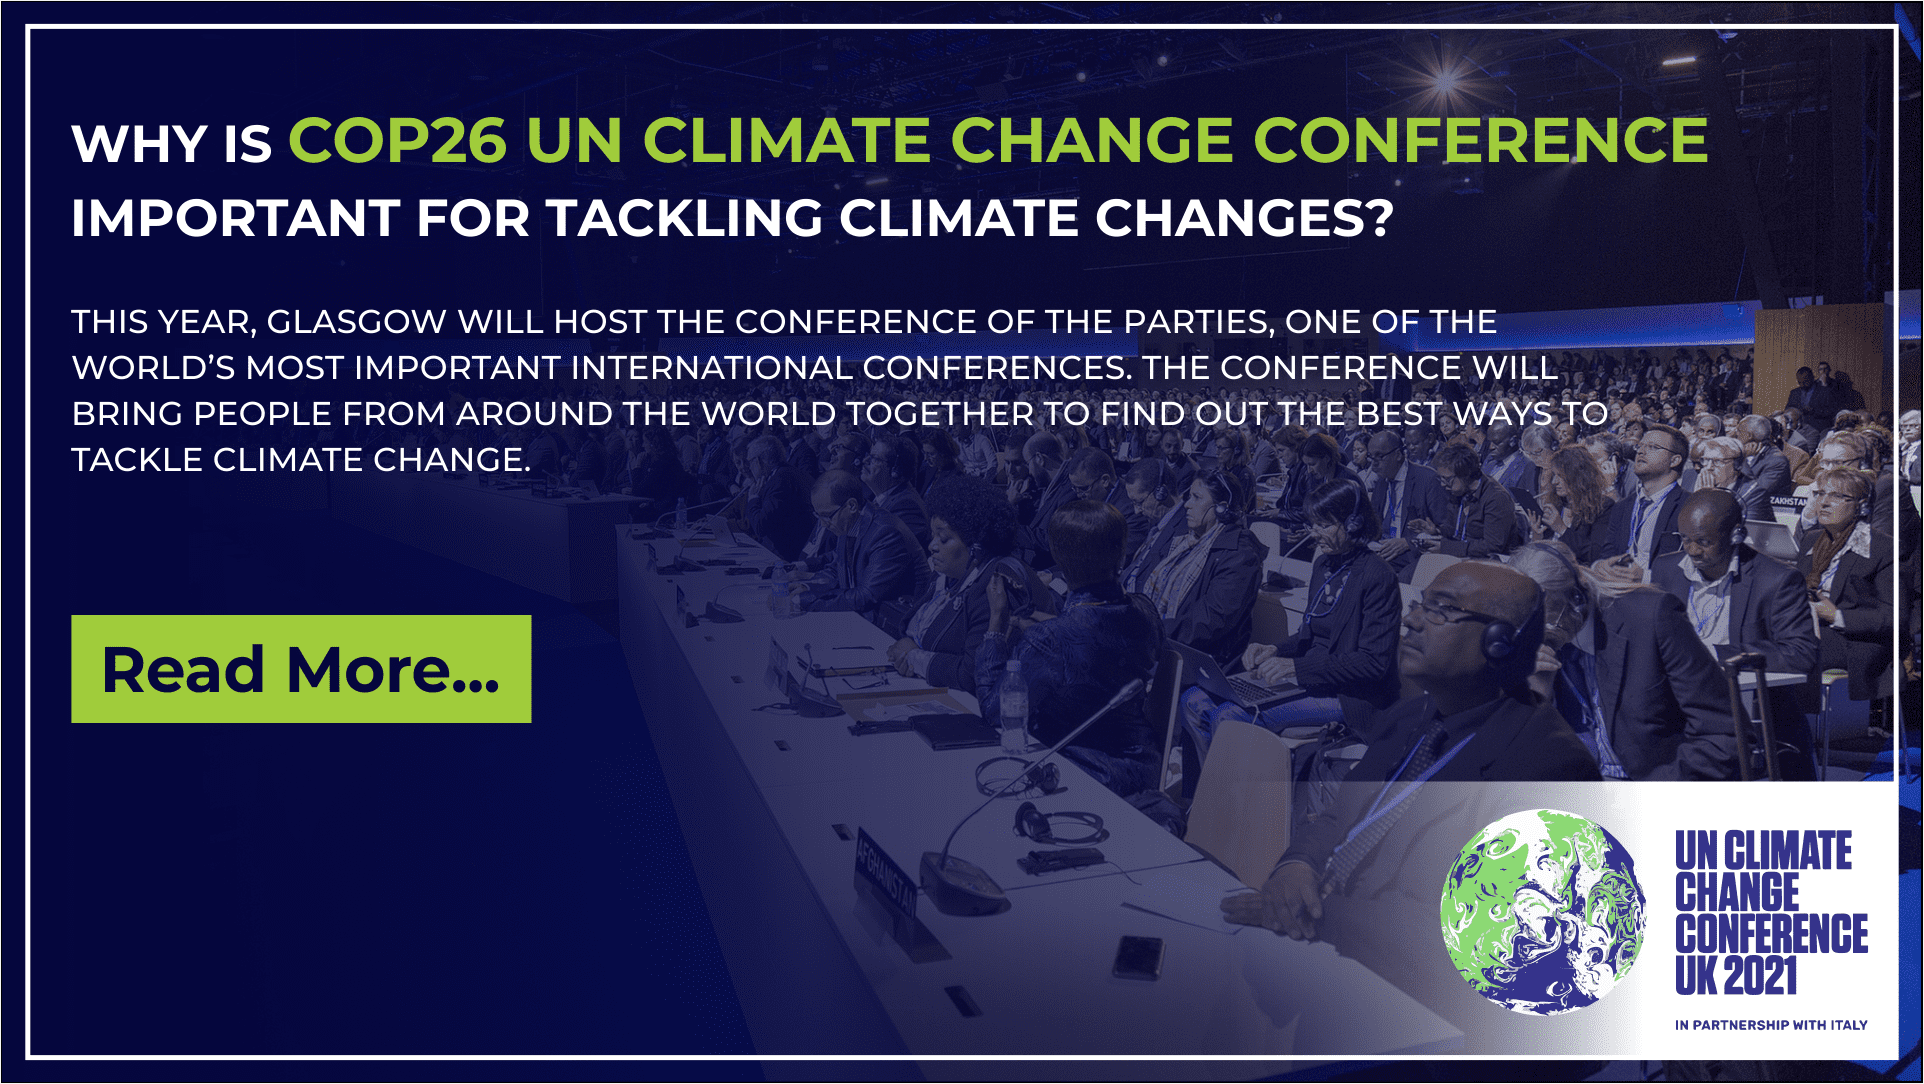 Why is COP26 UN Climate Change Conference Important for Tackling